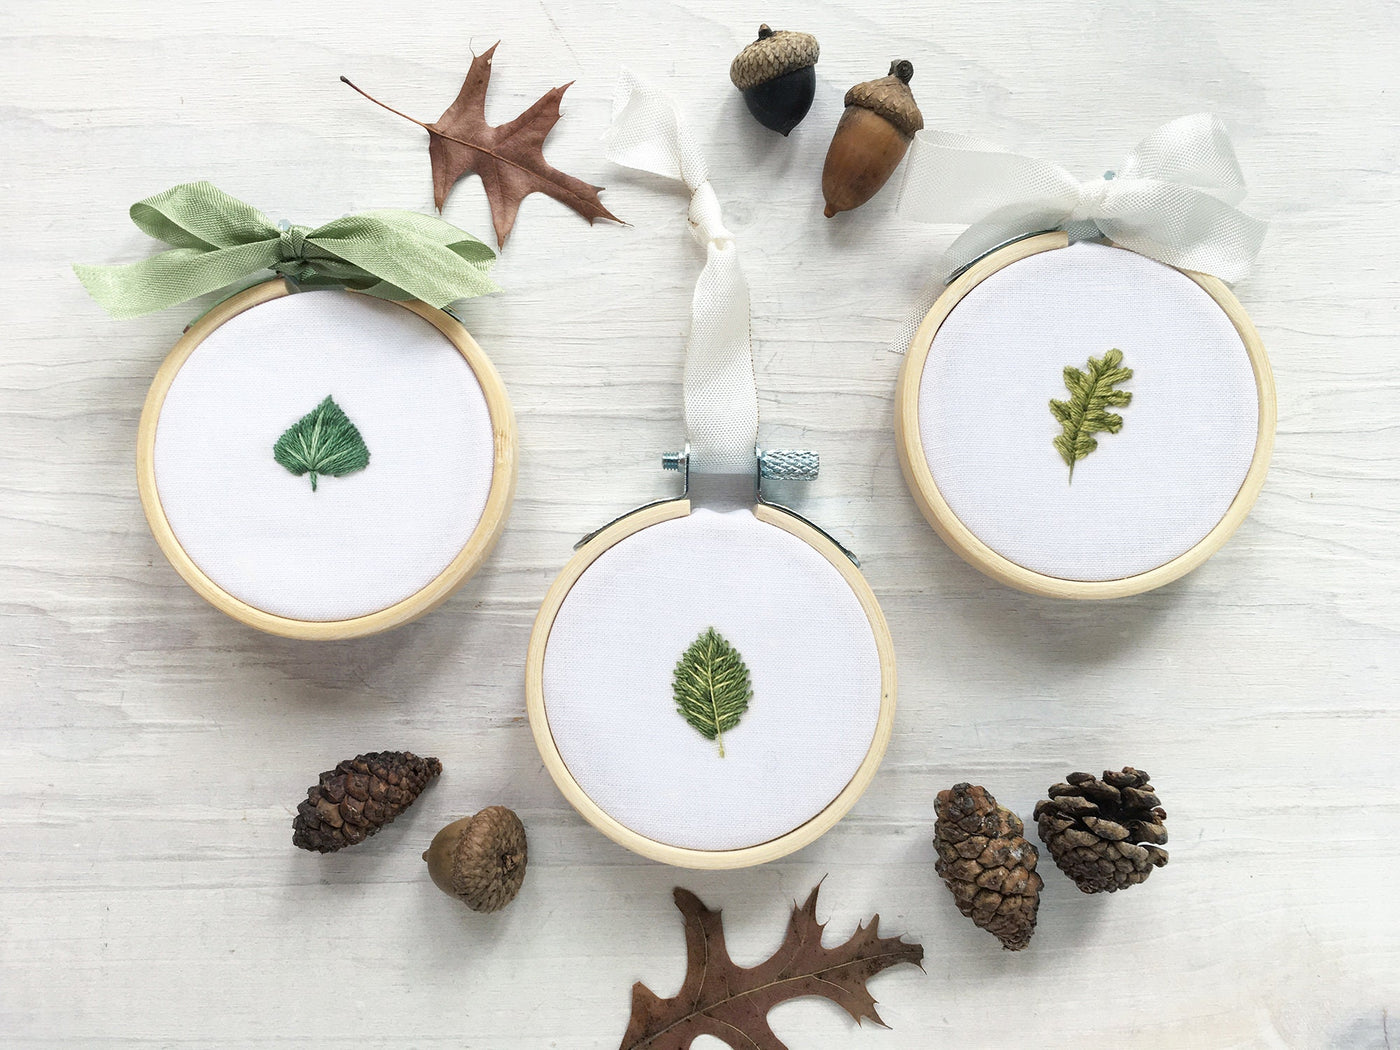 6 Tiny Collections embroidery patterns, mini Mushrooms, Succulents, Acorns, Crystals, Herbs and Leaves